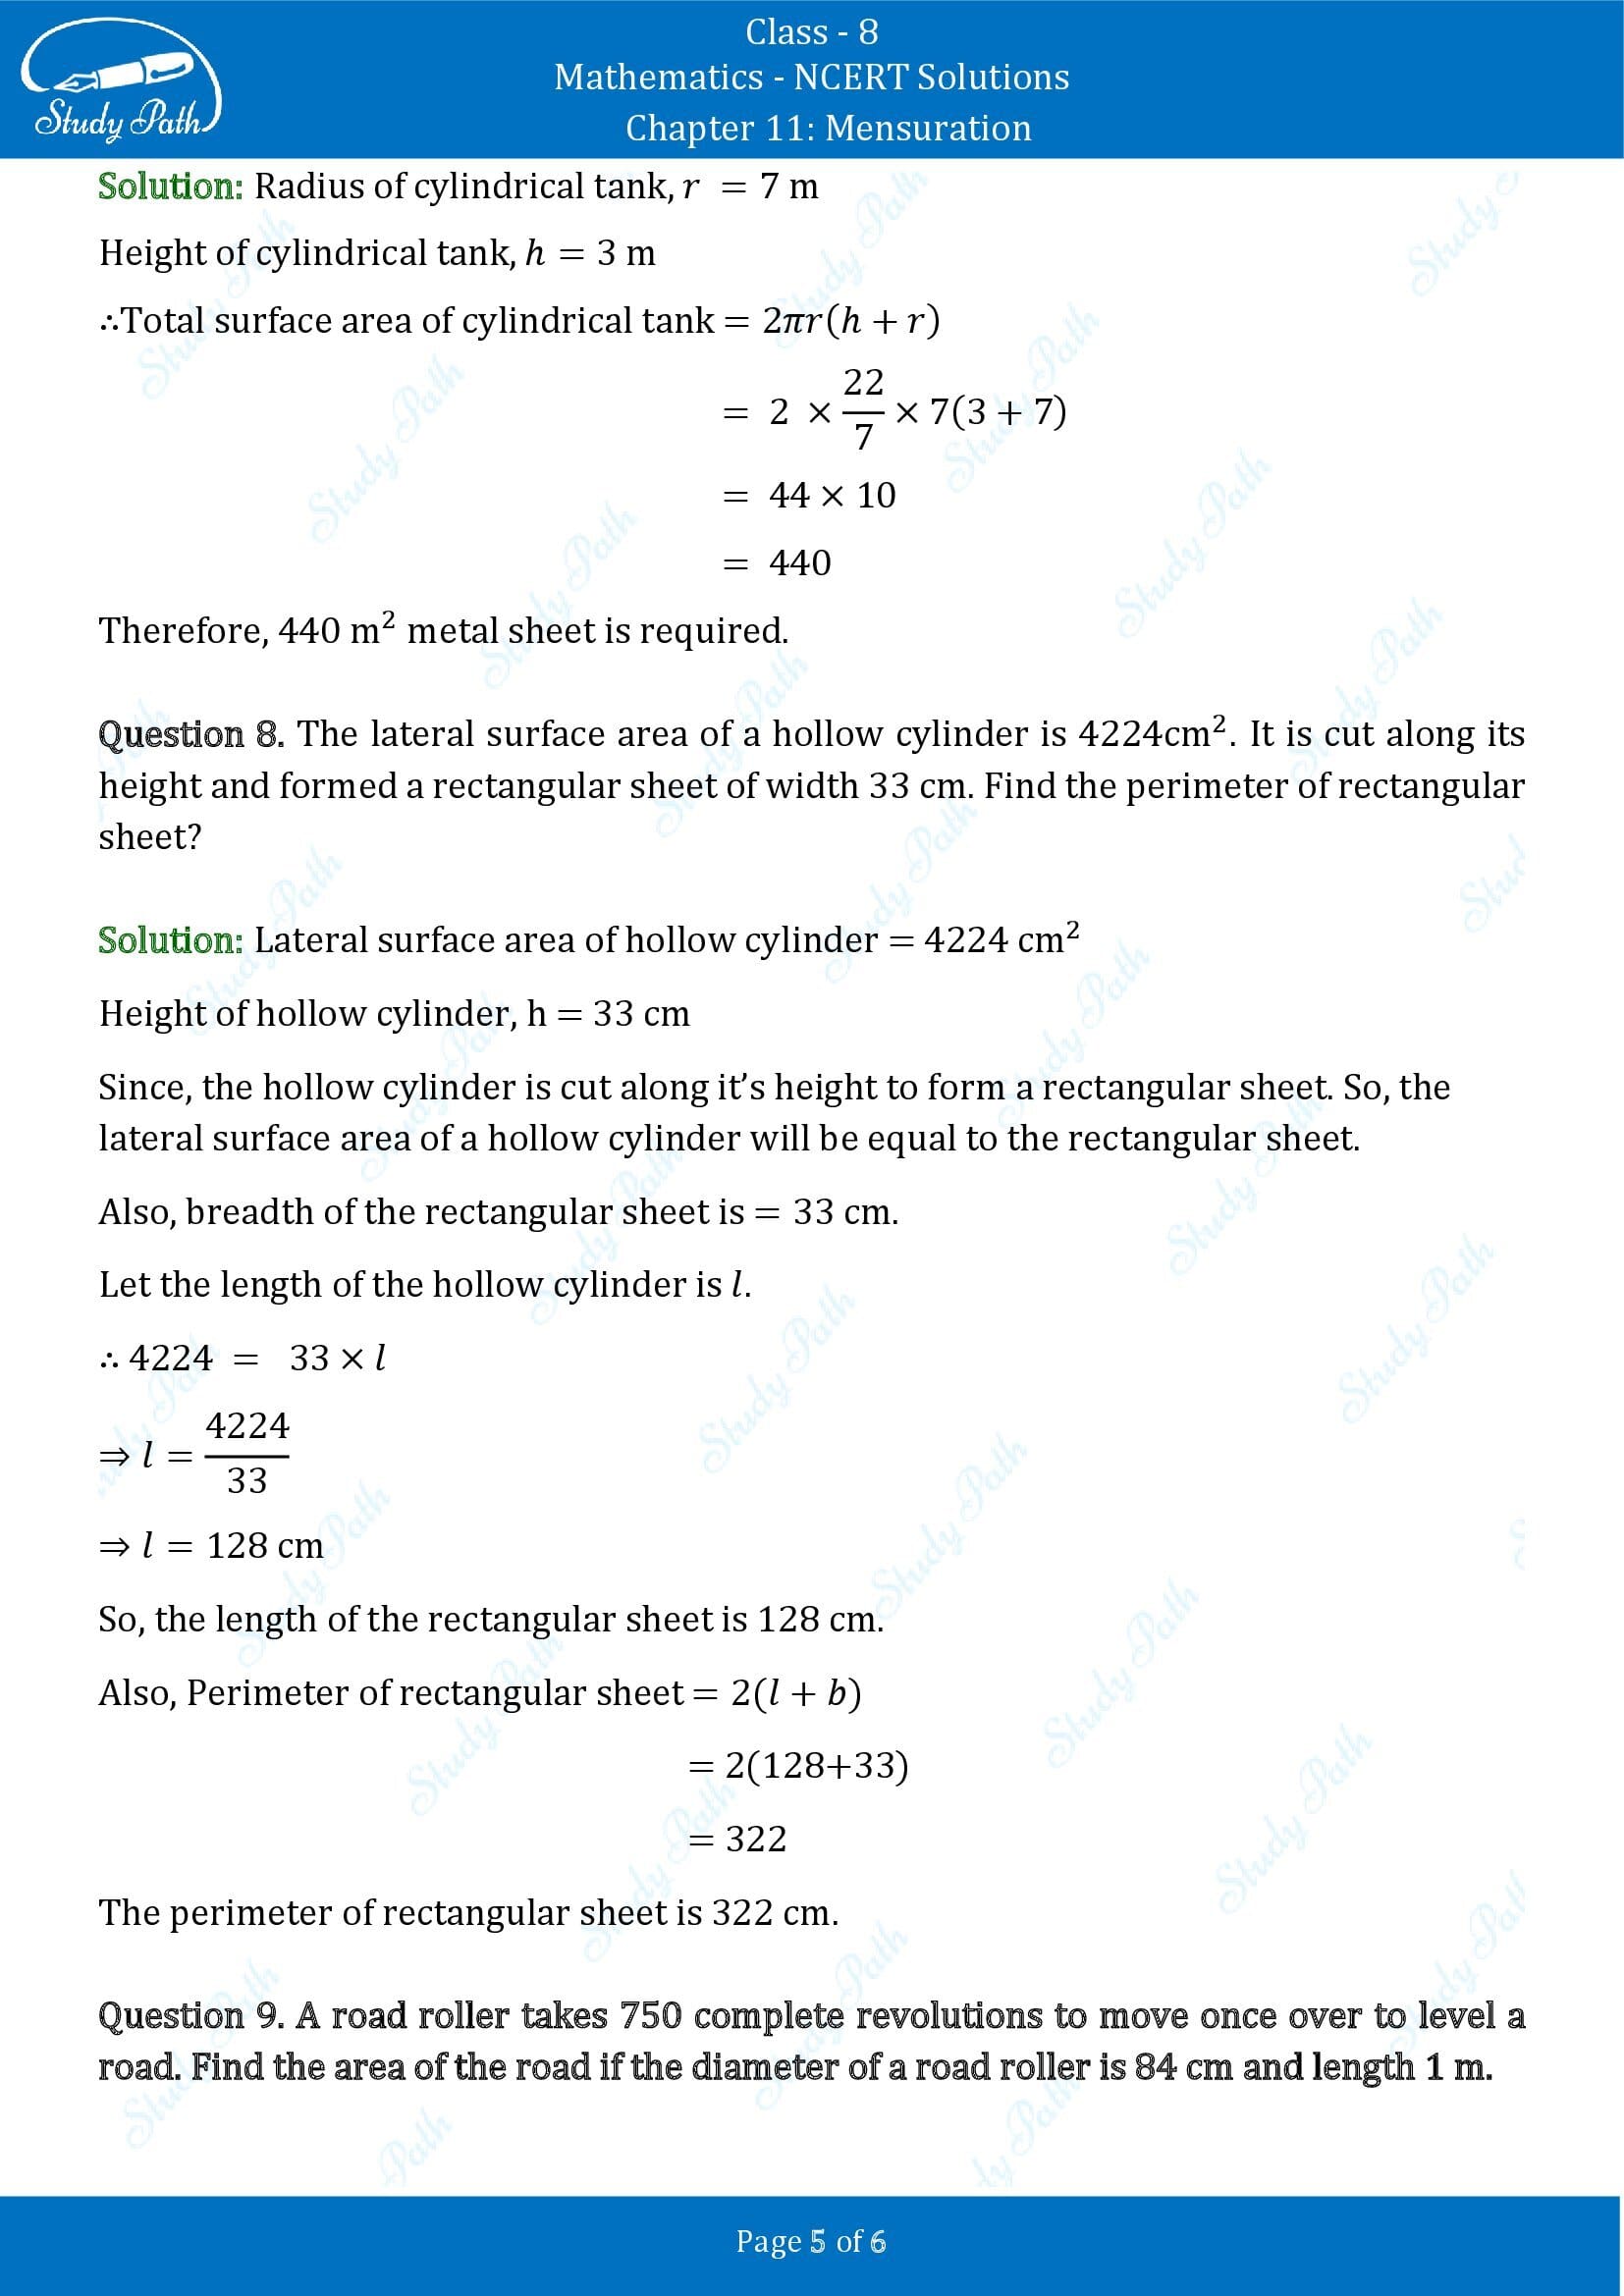 NCERT Solutions for Class 8 Maths Chapter 11 Mensuration Exercise 11.3 00005